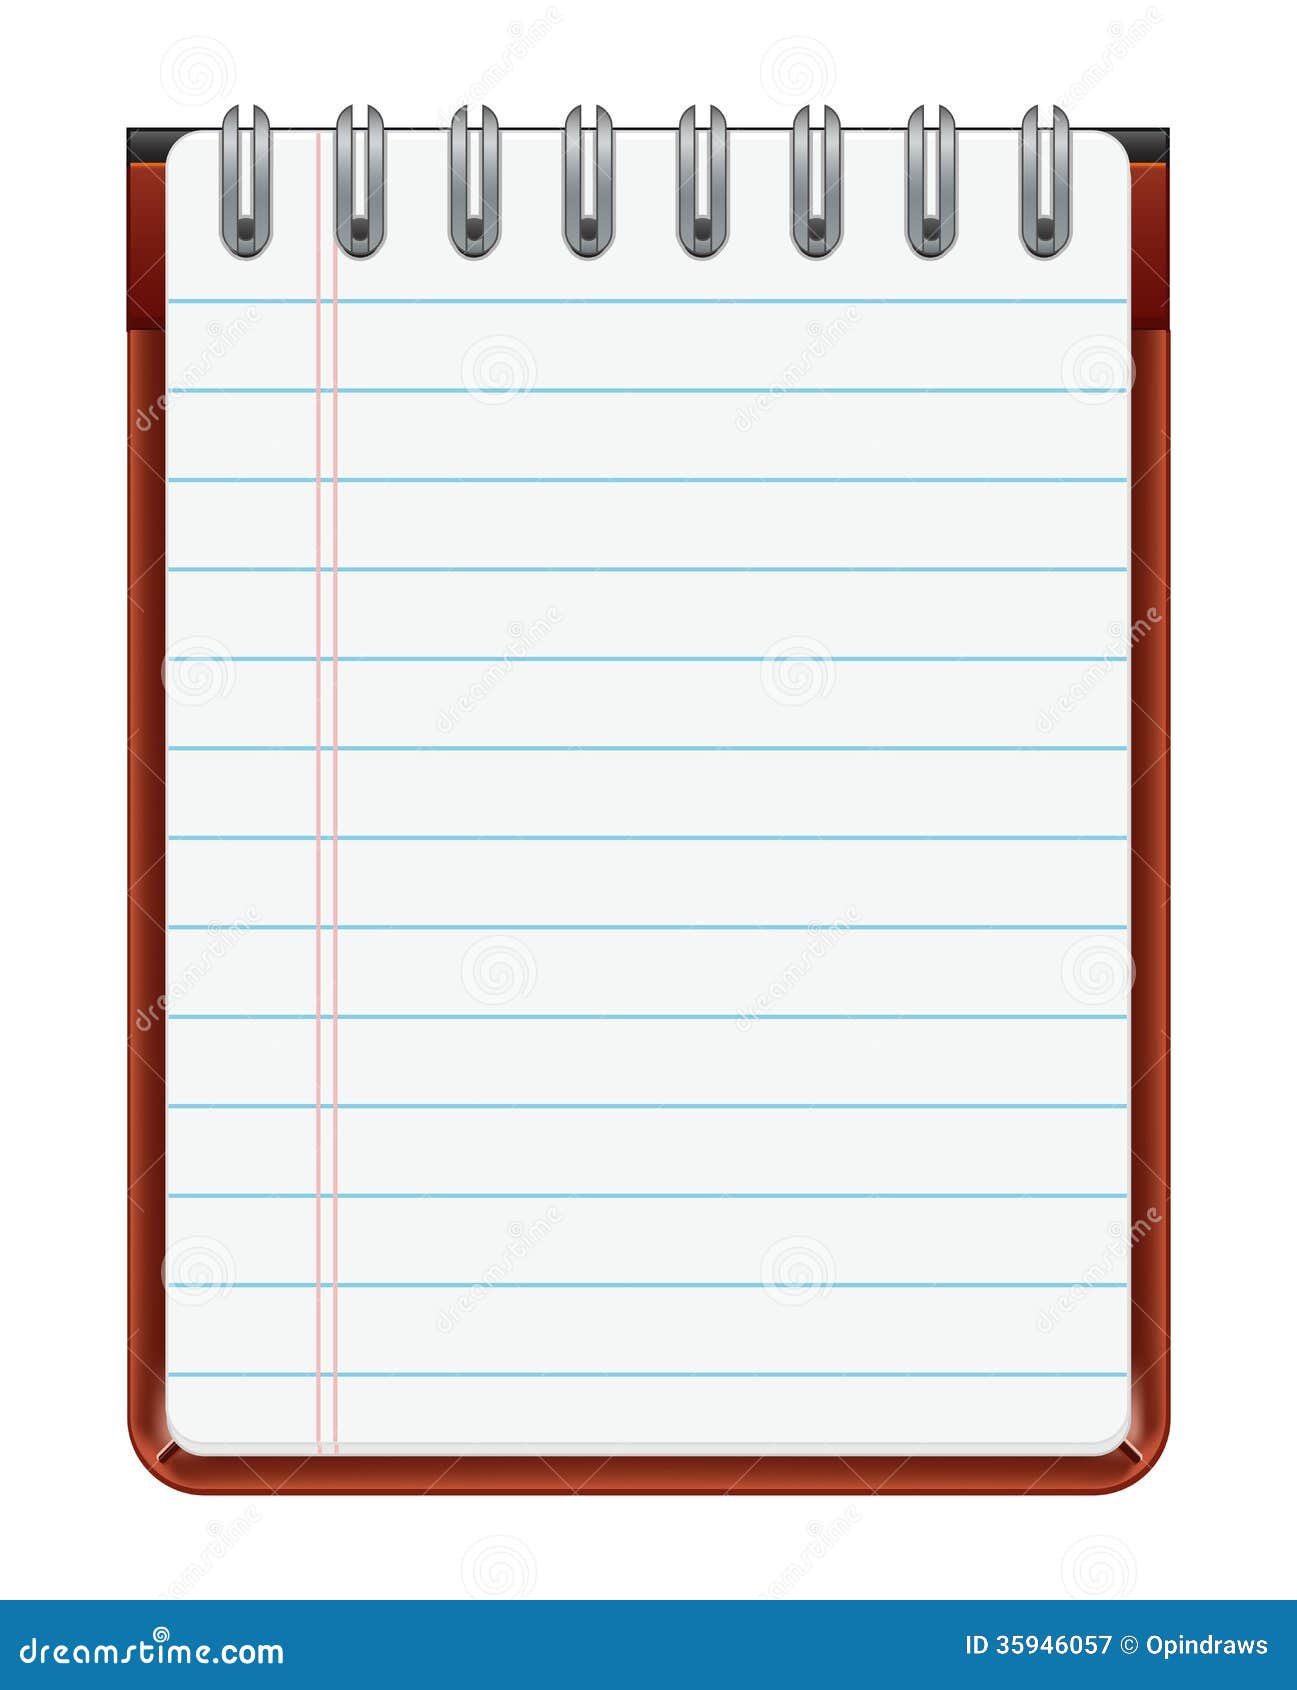 Notepad picture of a dick